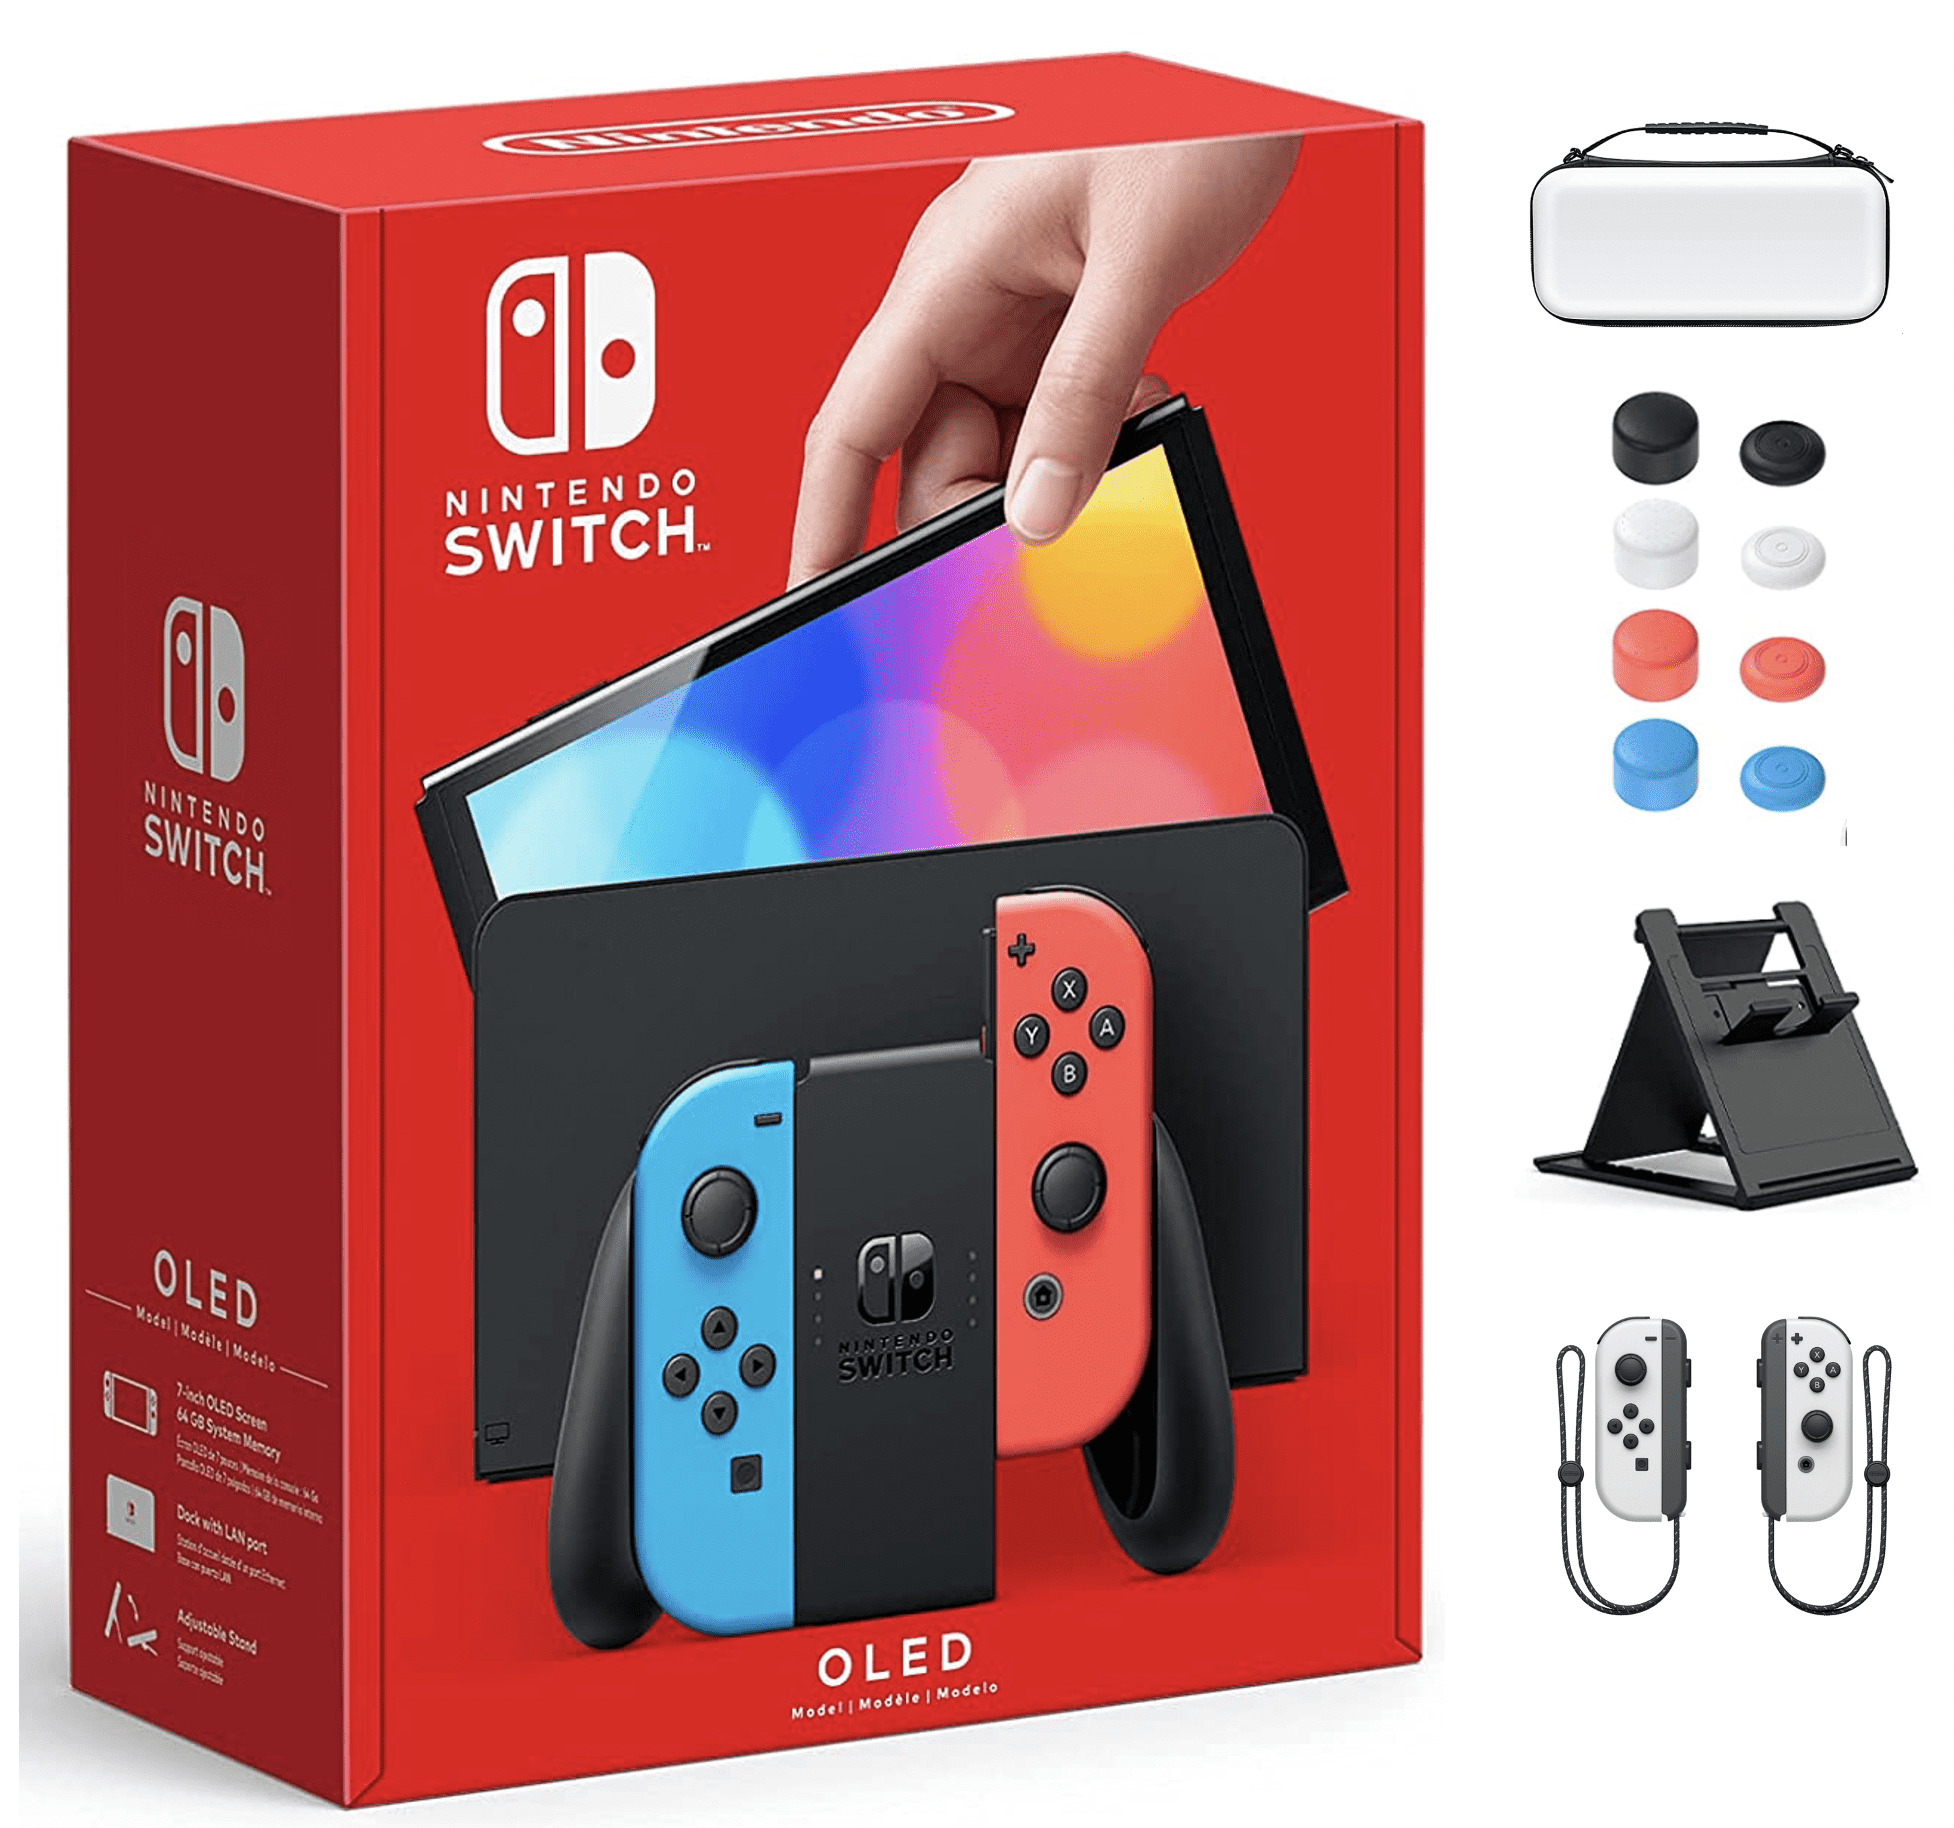 kaptajn erindringer Prestige 2022 Newest Nintendo Switch OLED Model 64GB Gaming Console with White  Joy-Con, 7 inch 1280 x 720 OLED Touchscreen Display, Built-in Speaker,  WiFi, Bluetooth 4.1 + Marxsol Accessories Holiday Bundle - Walmart.com